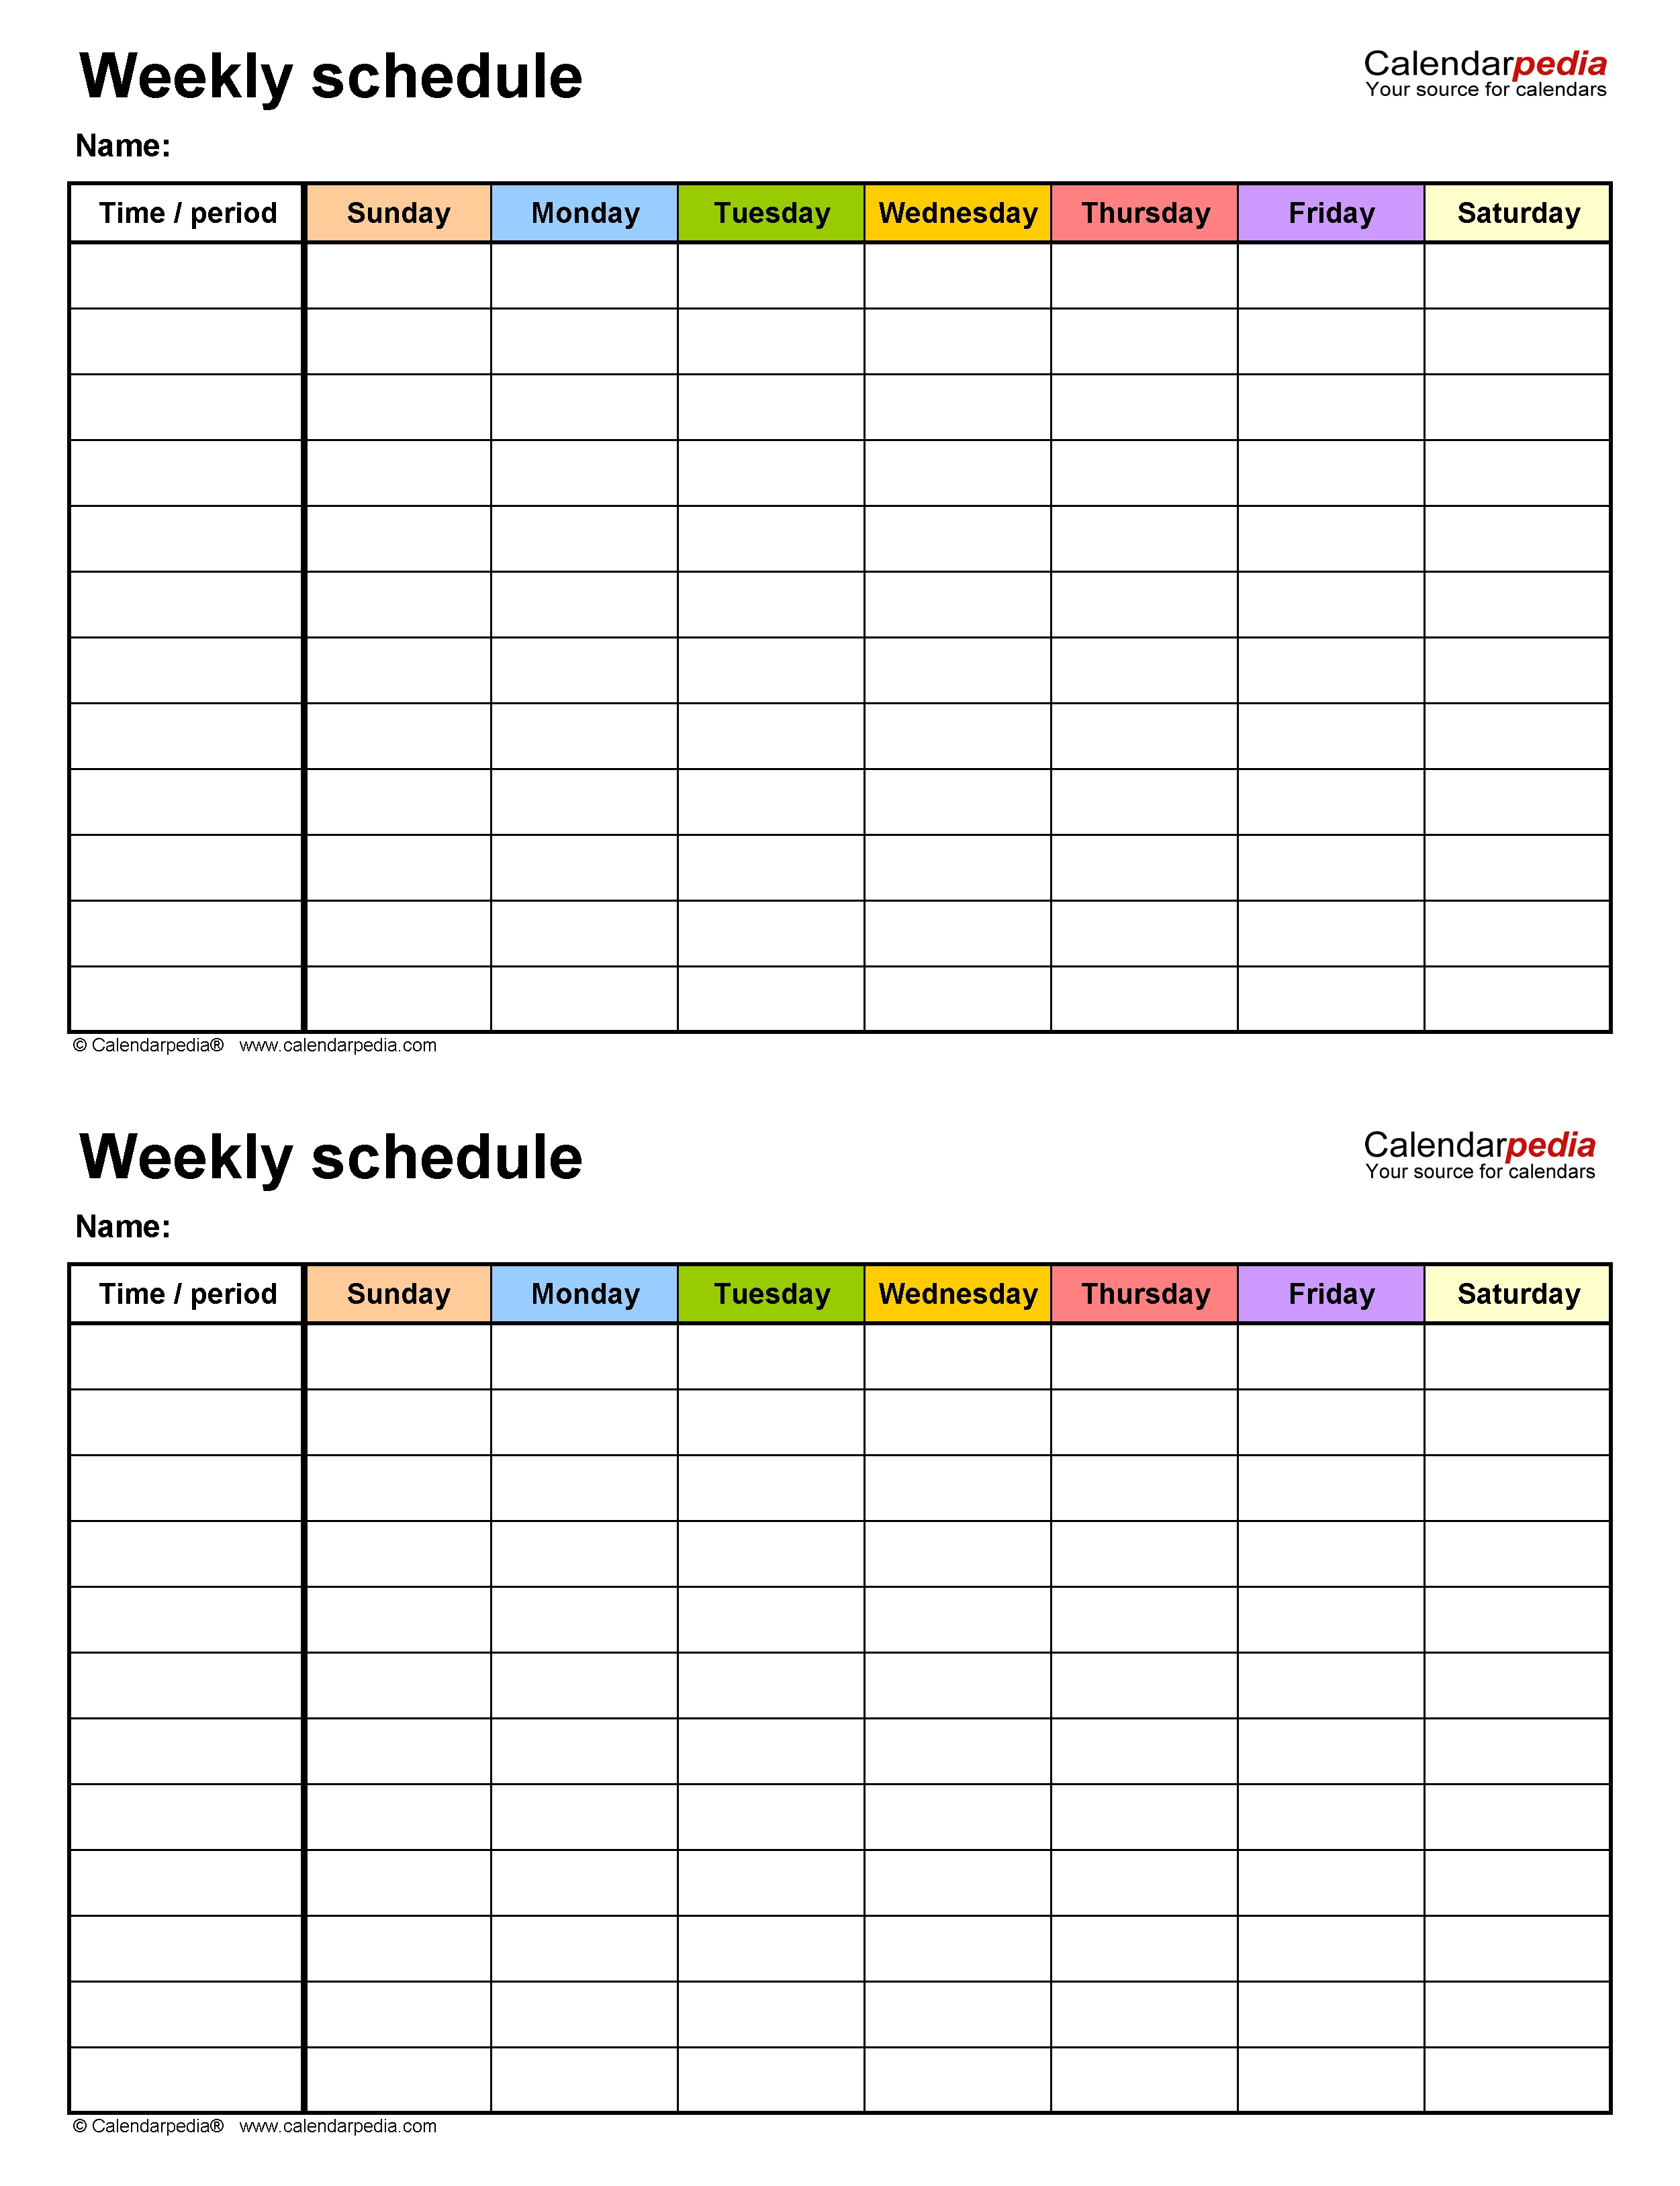 Free Weekly Schedule Templates For Word - 18 Templates Free Printable Calendar Templates Weekly